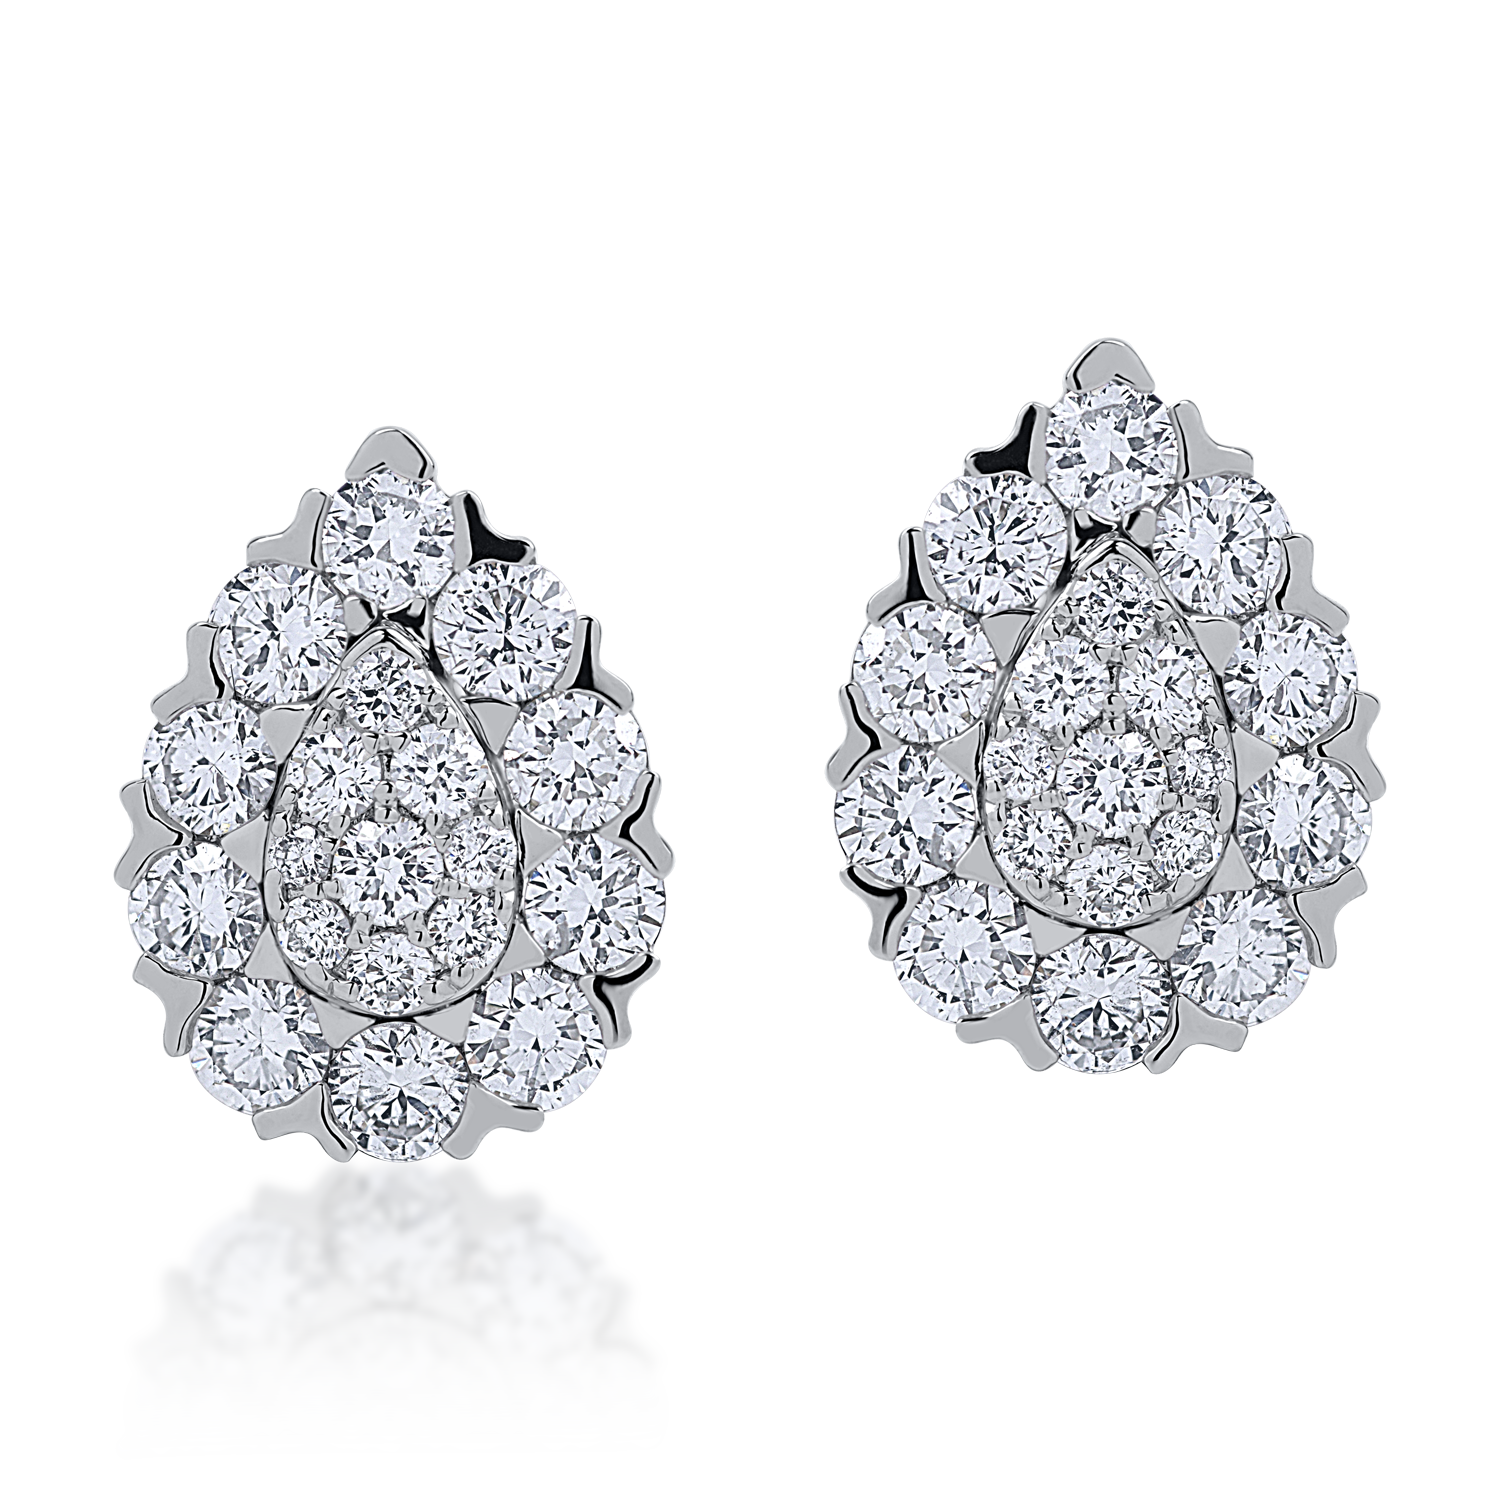 White gold earrings with 0.95ct diamonds